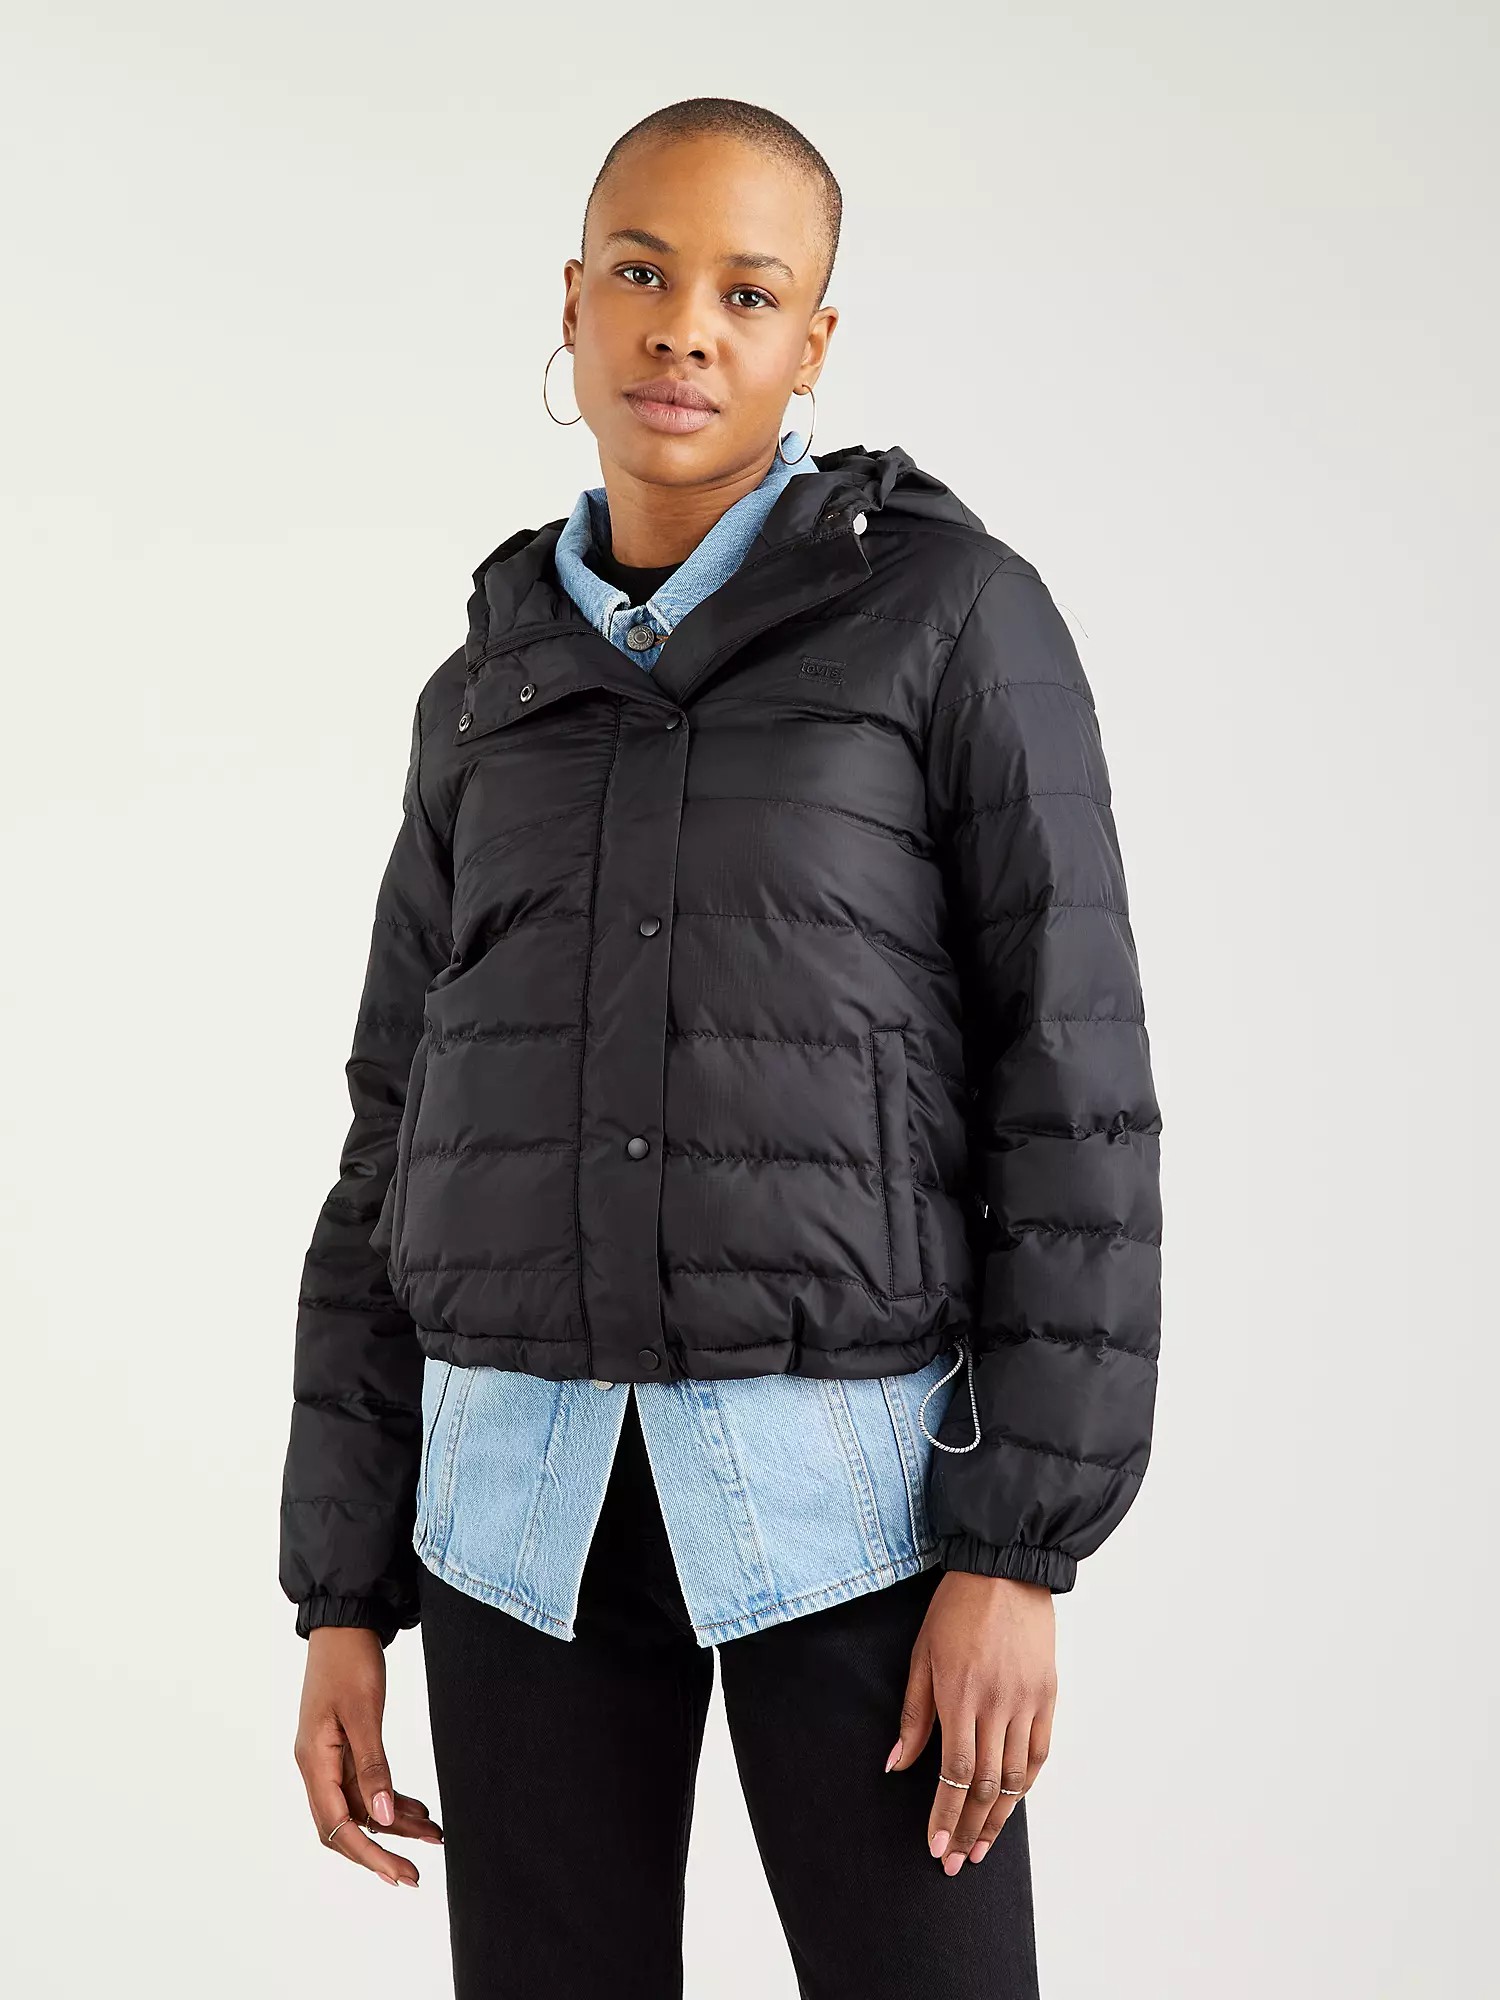 Outerwear & Cropped Denim Jacket for Women | Levi's® PH